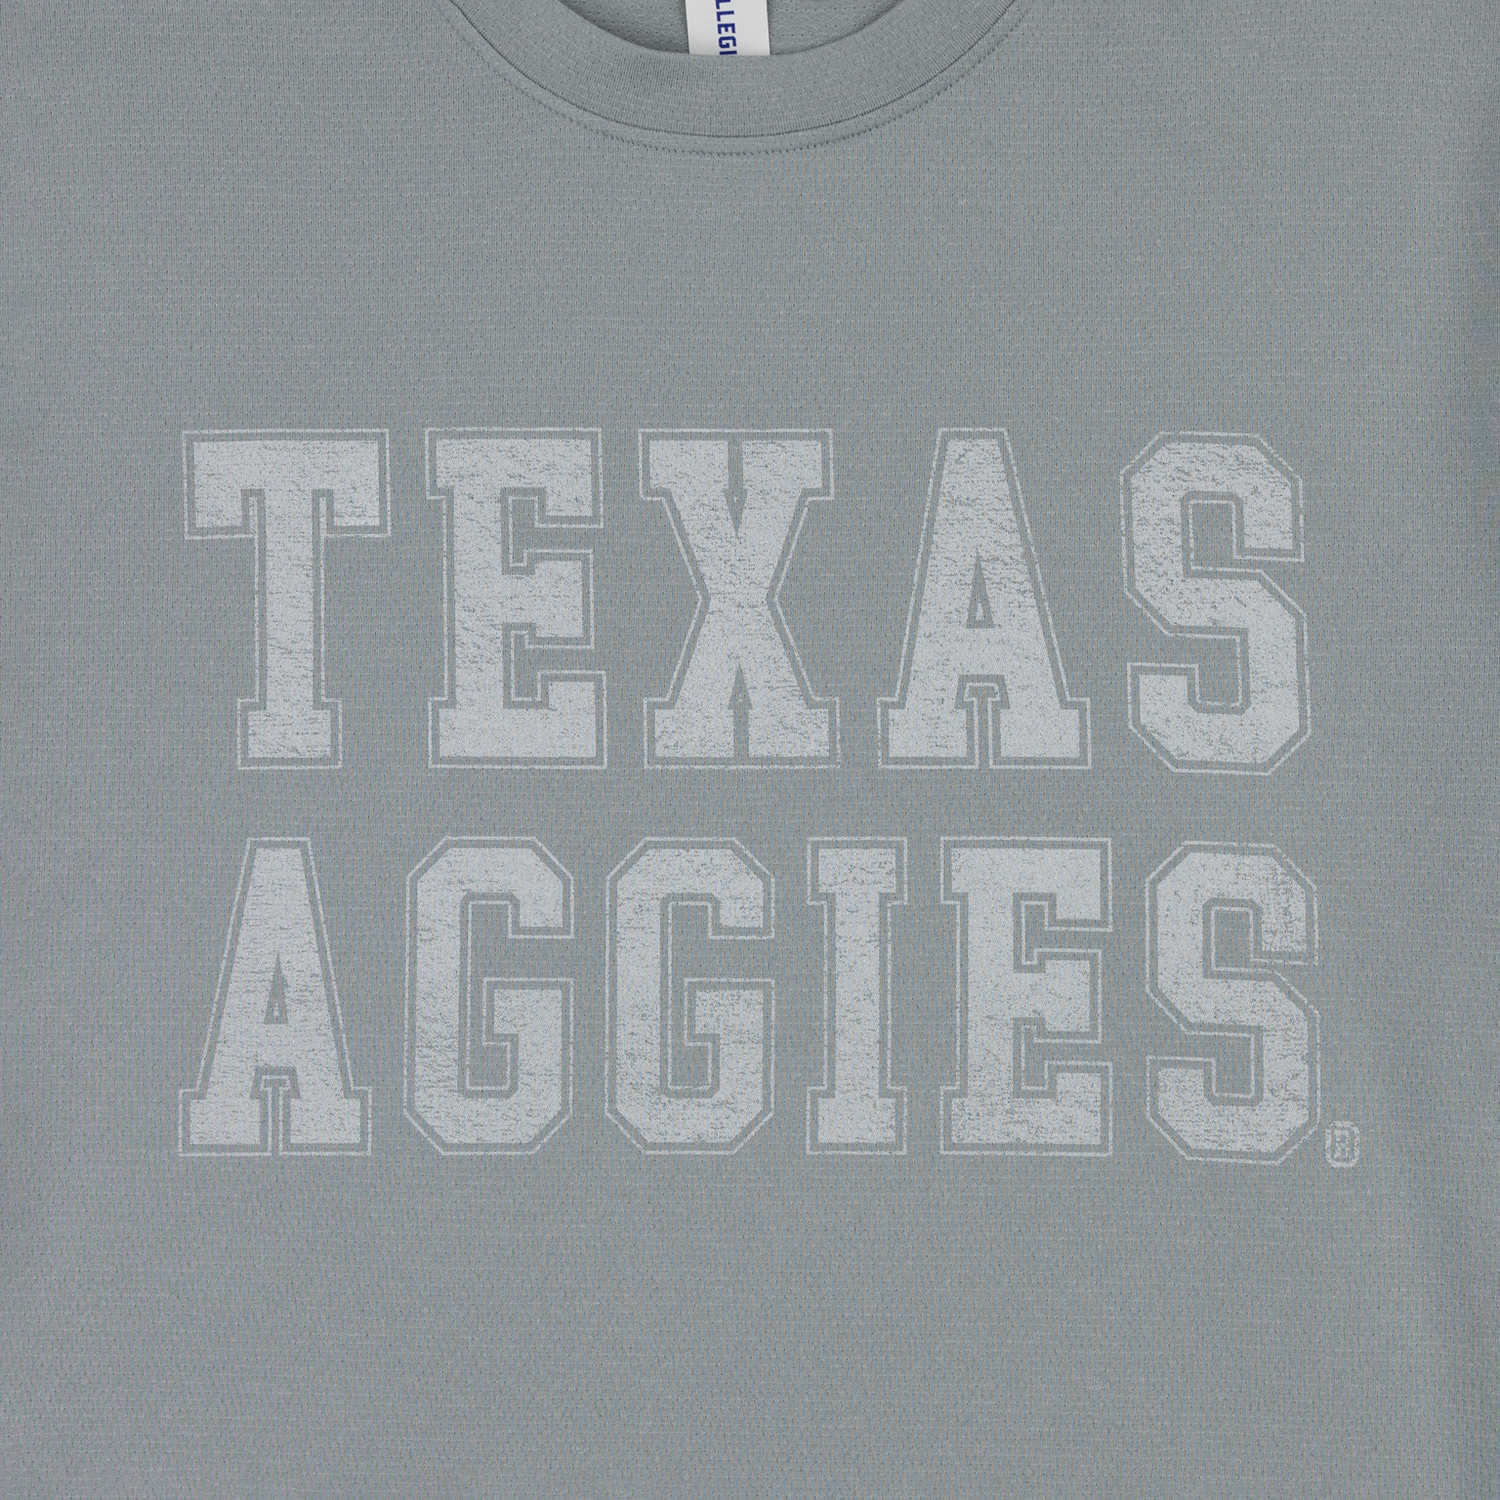 Texas Aggies Grey Outfitters Tech T-Shirt